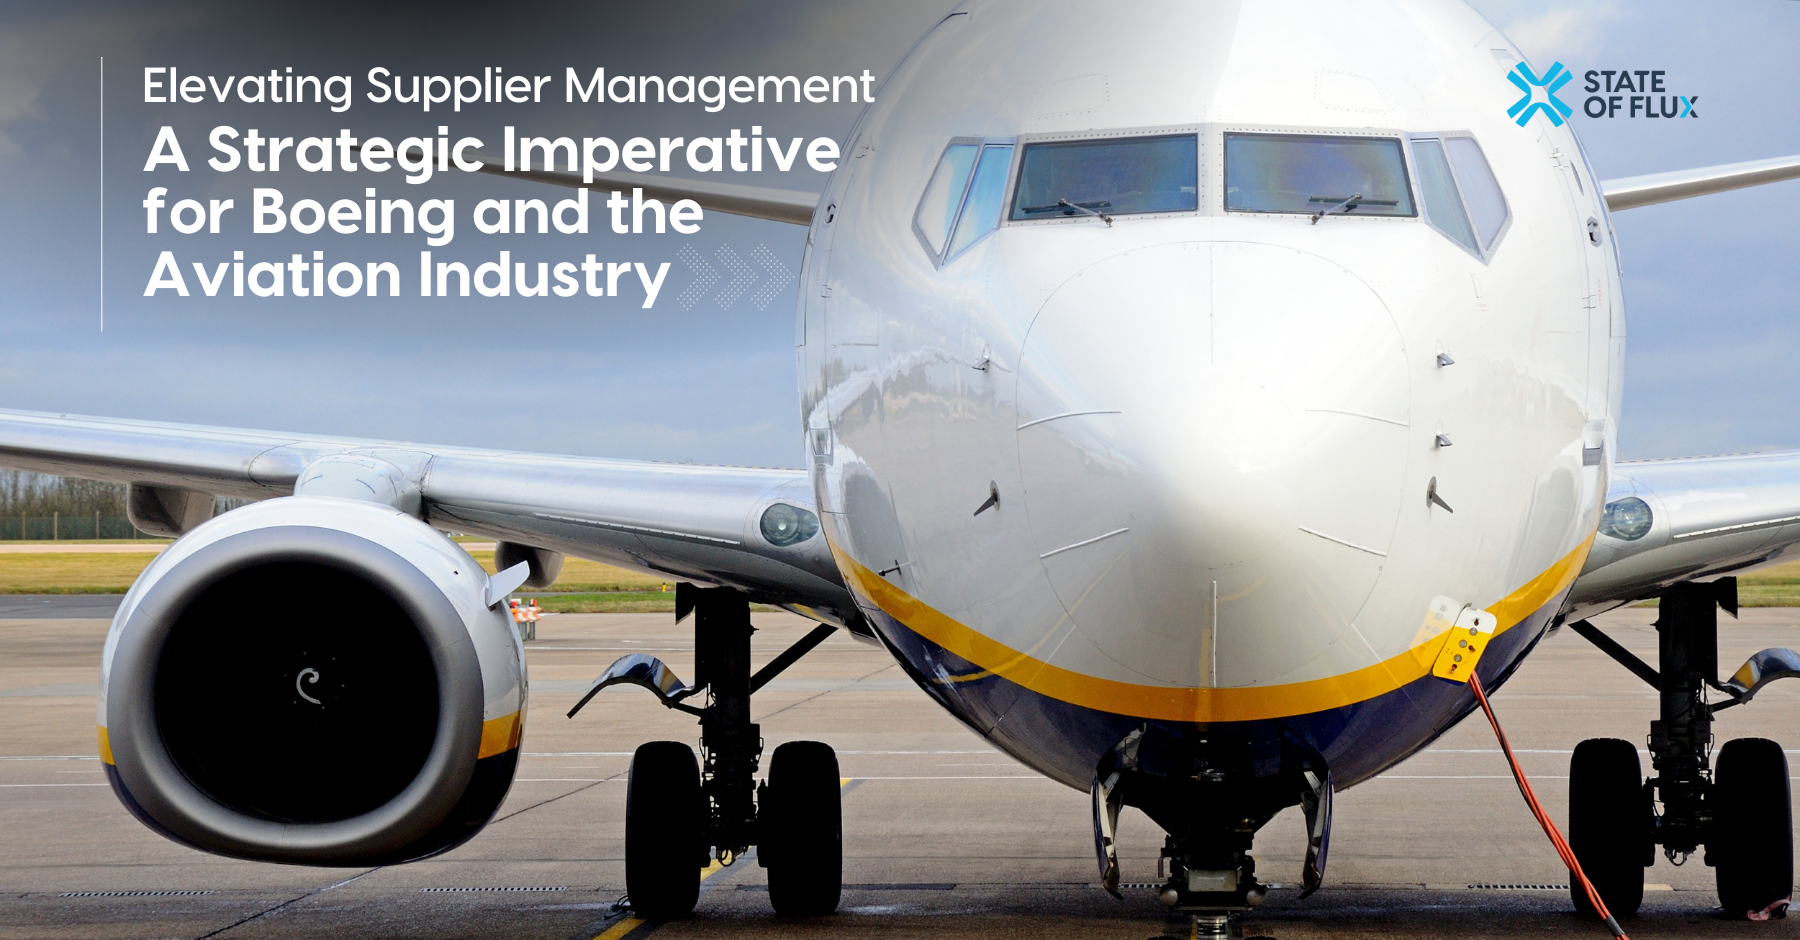 Elevating Supplier Management: A Strategic Imperative for Boeing and the Aviation Industry